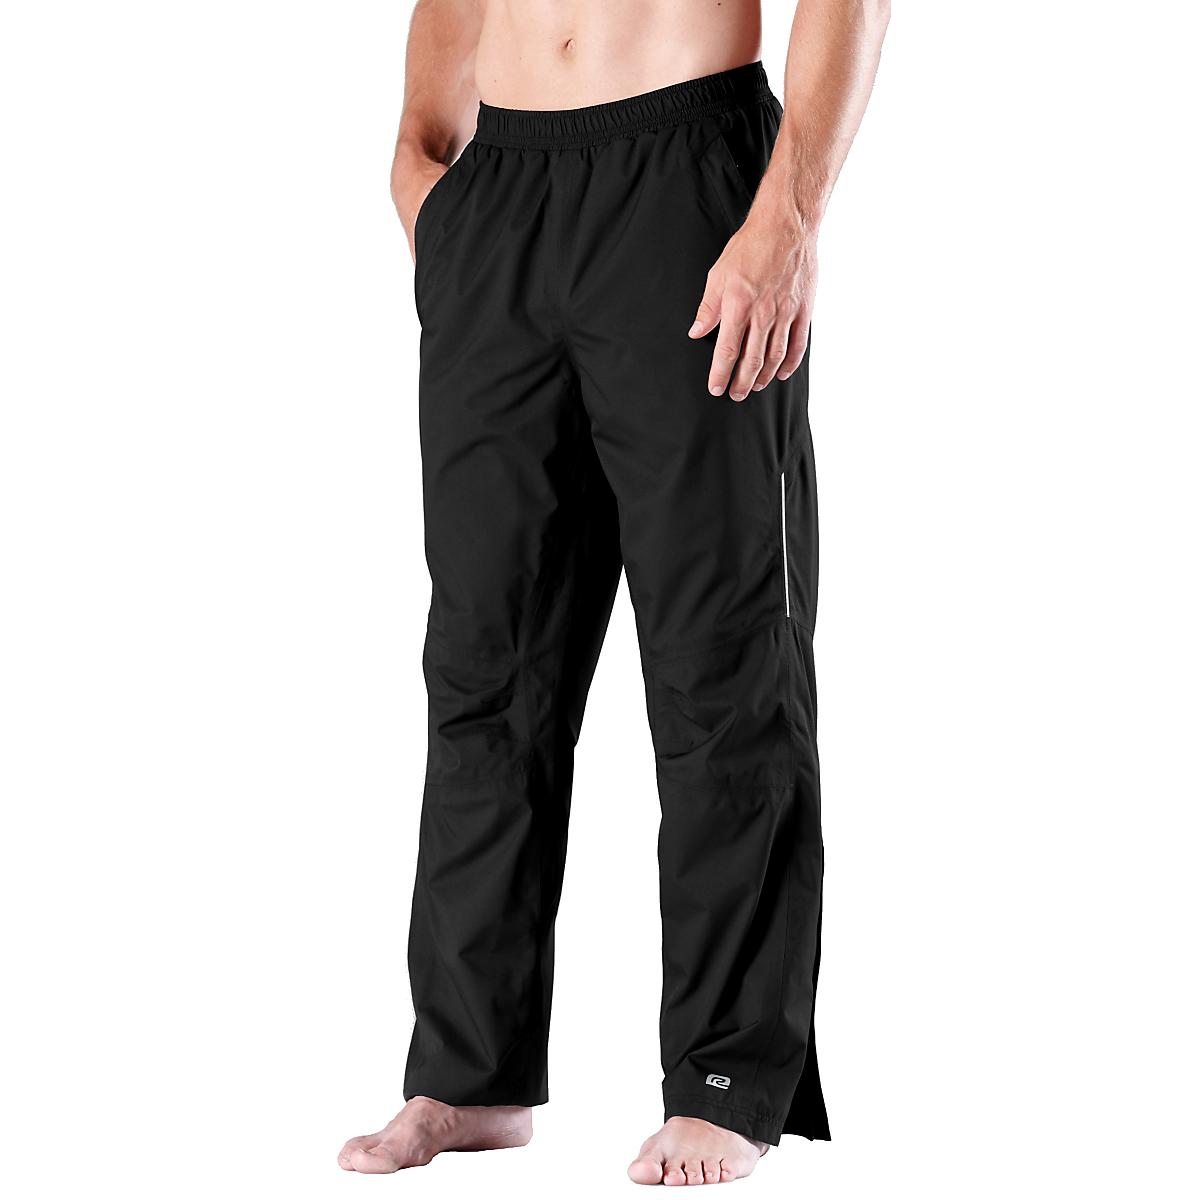 Mens Road Runner Sports Best Defense GORE-TEX Cold weather Pants at ...